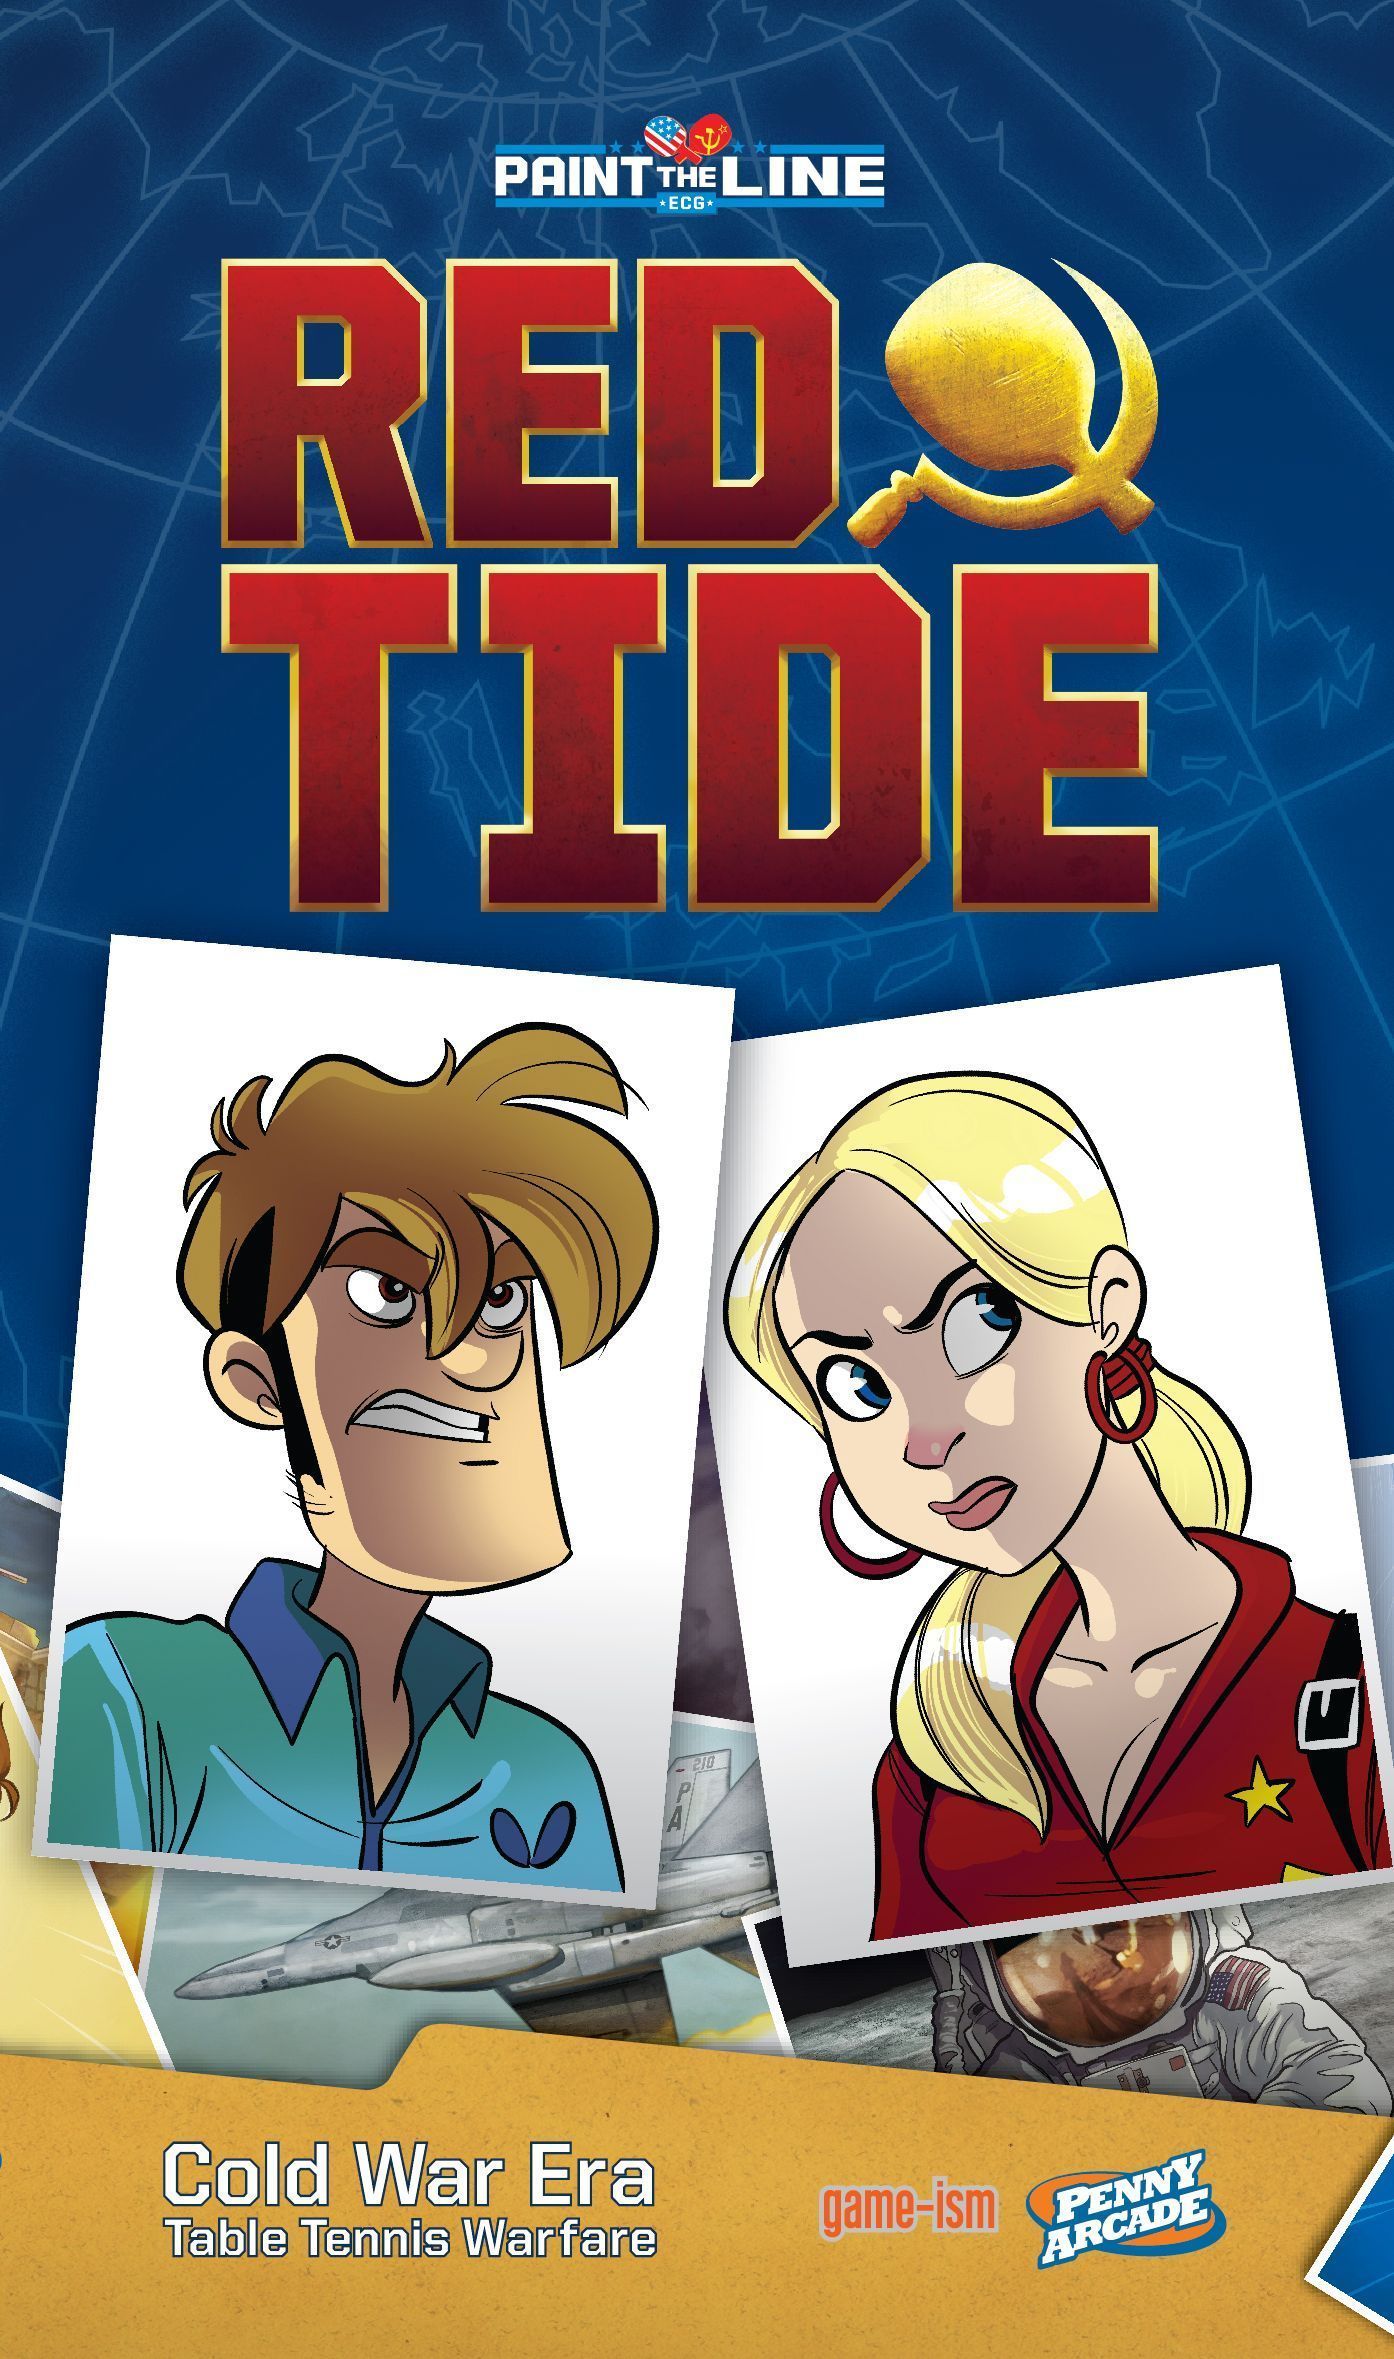 Penny Arcade: Paint The Line ECG – Red Tide